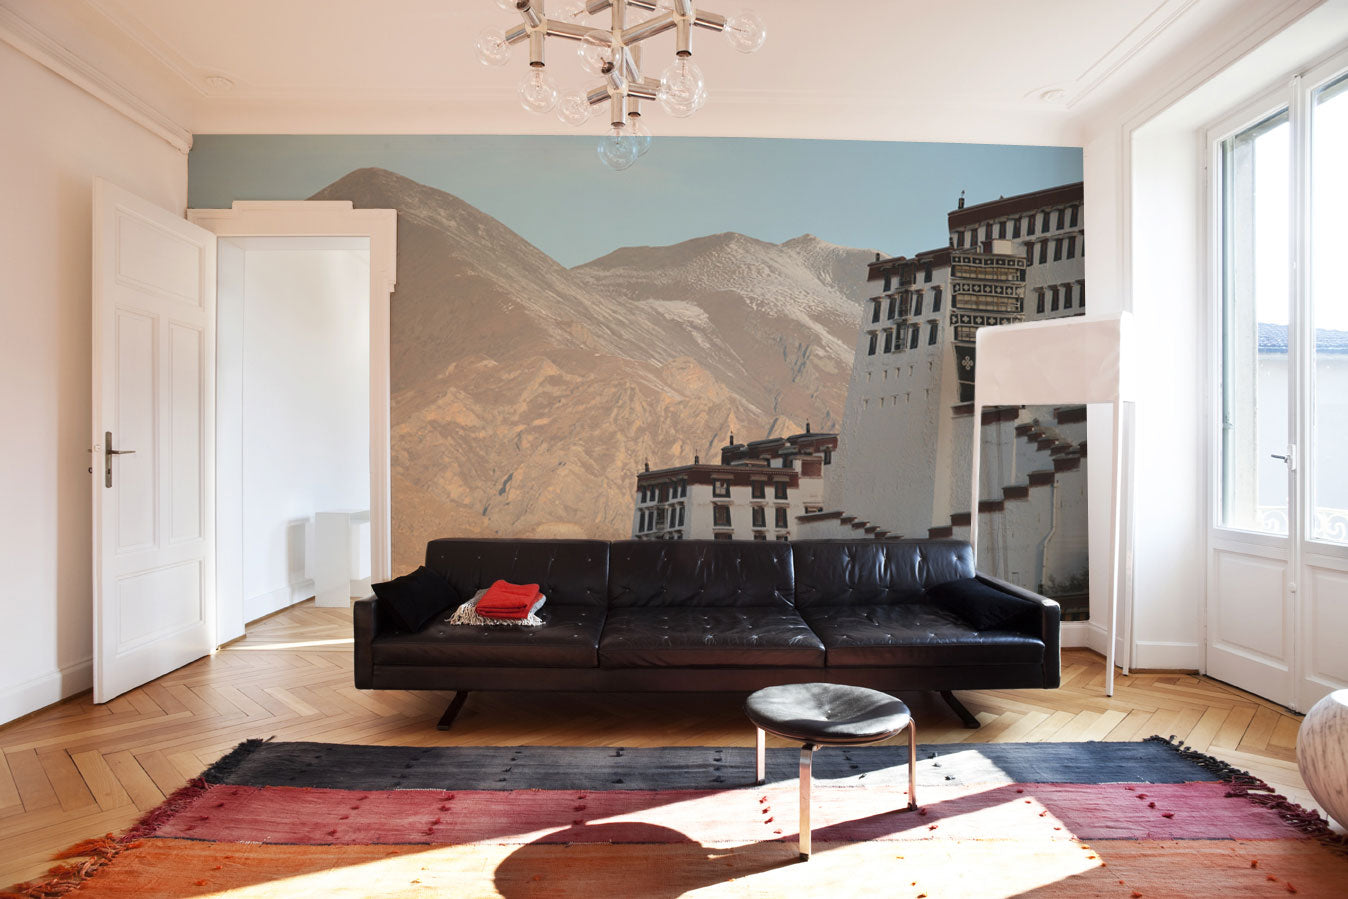 Wall Mural Ideas for Interior Designers | Eazywallz